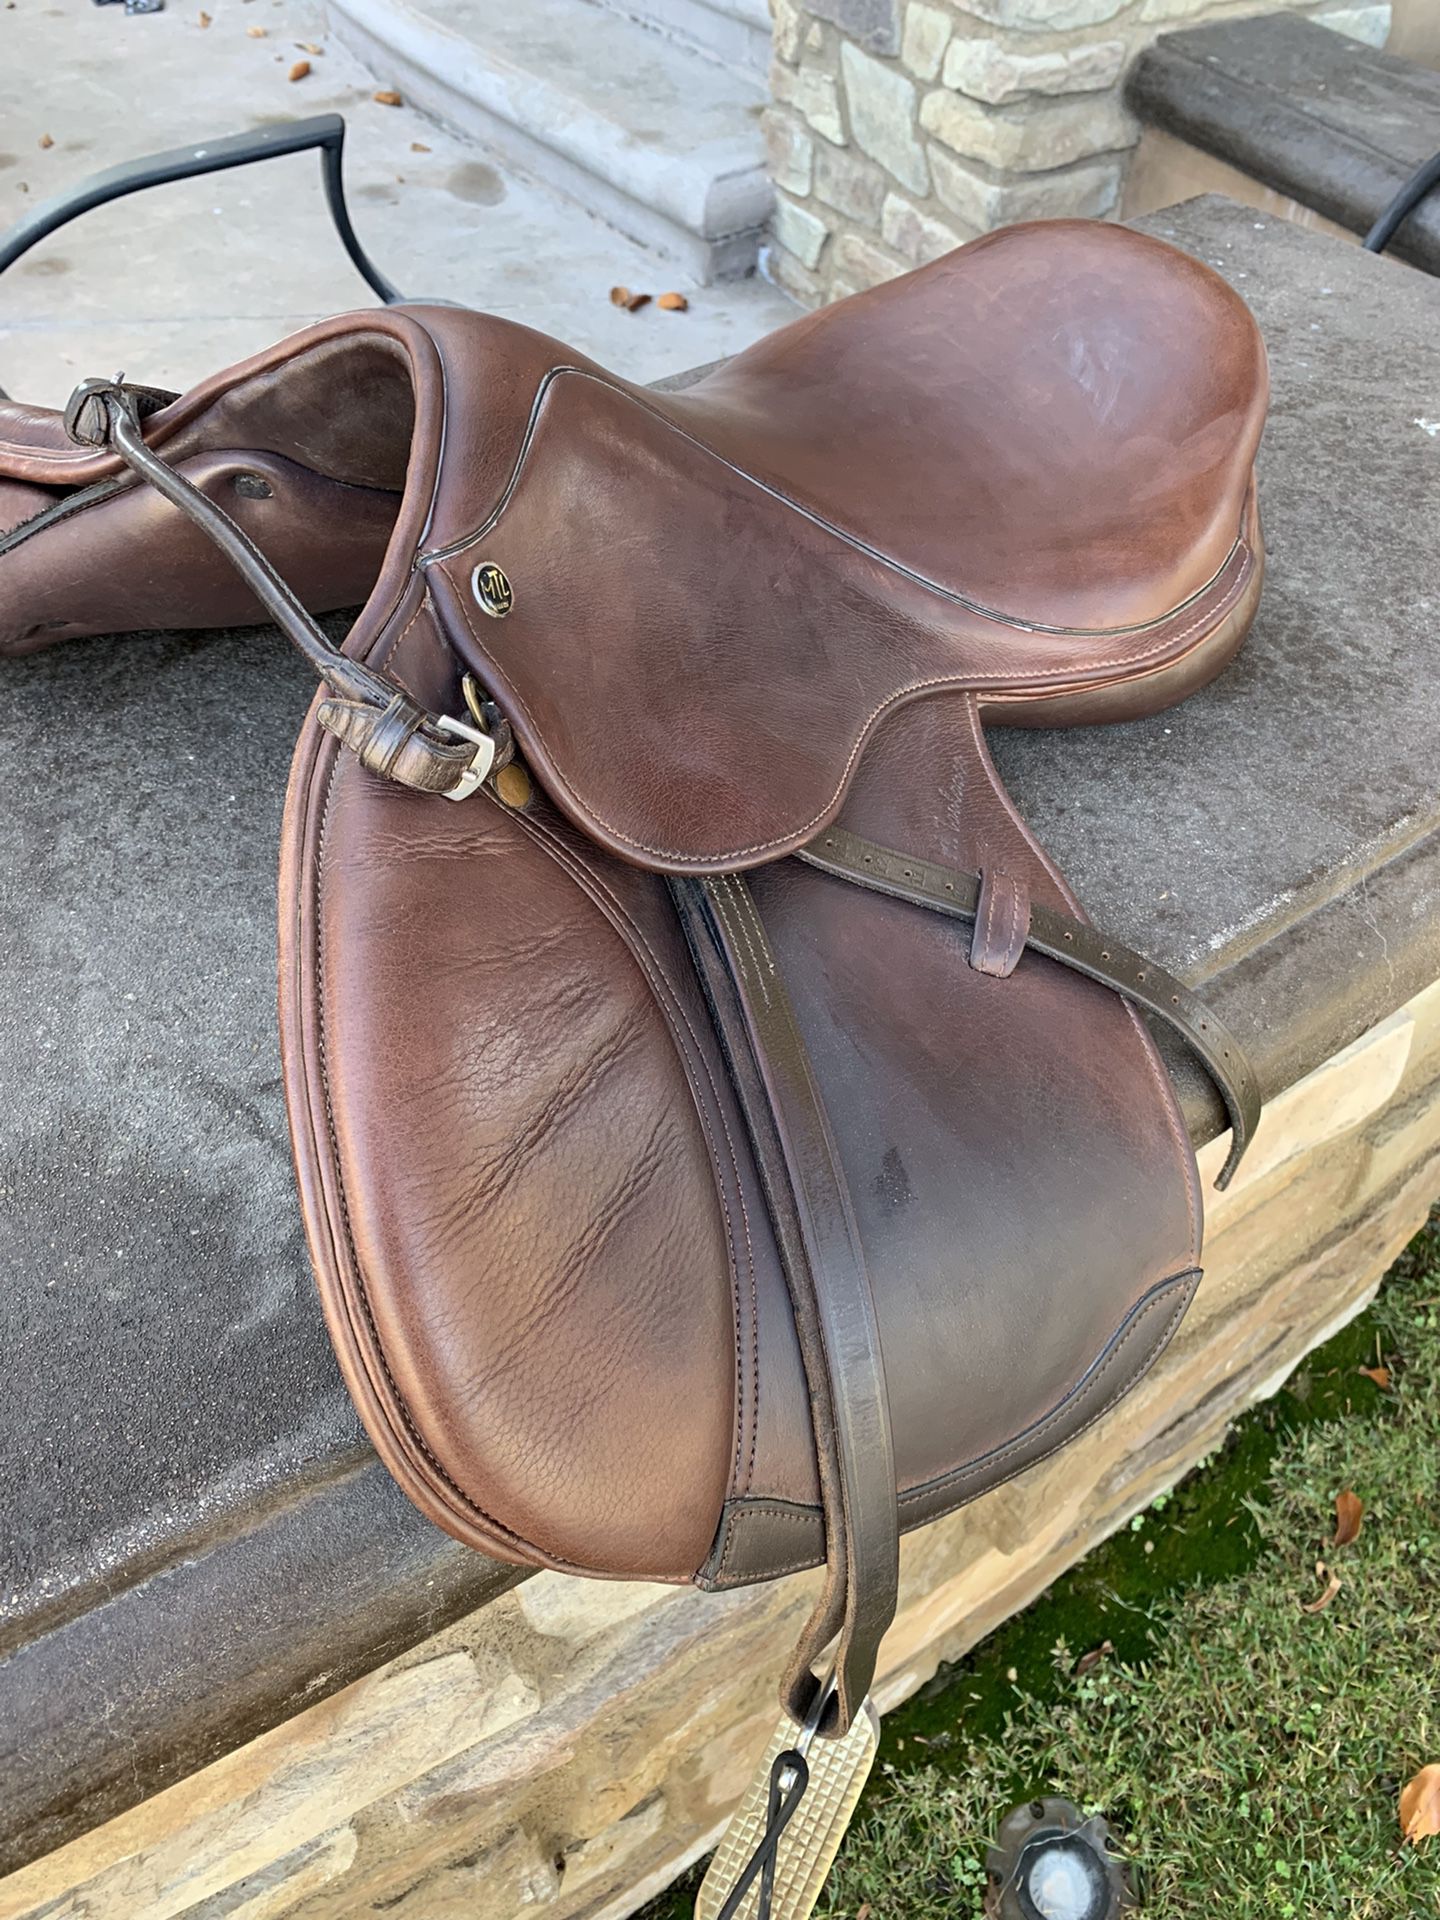 Horse saddle and riding gear